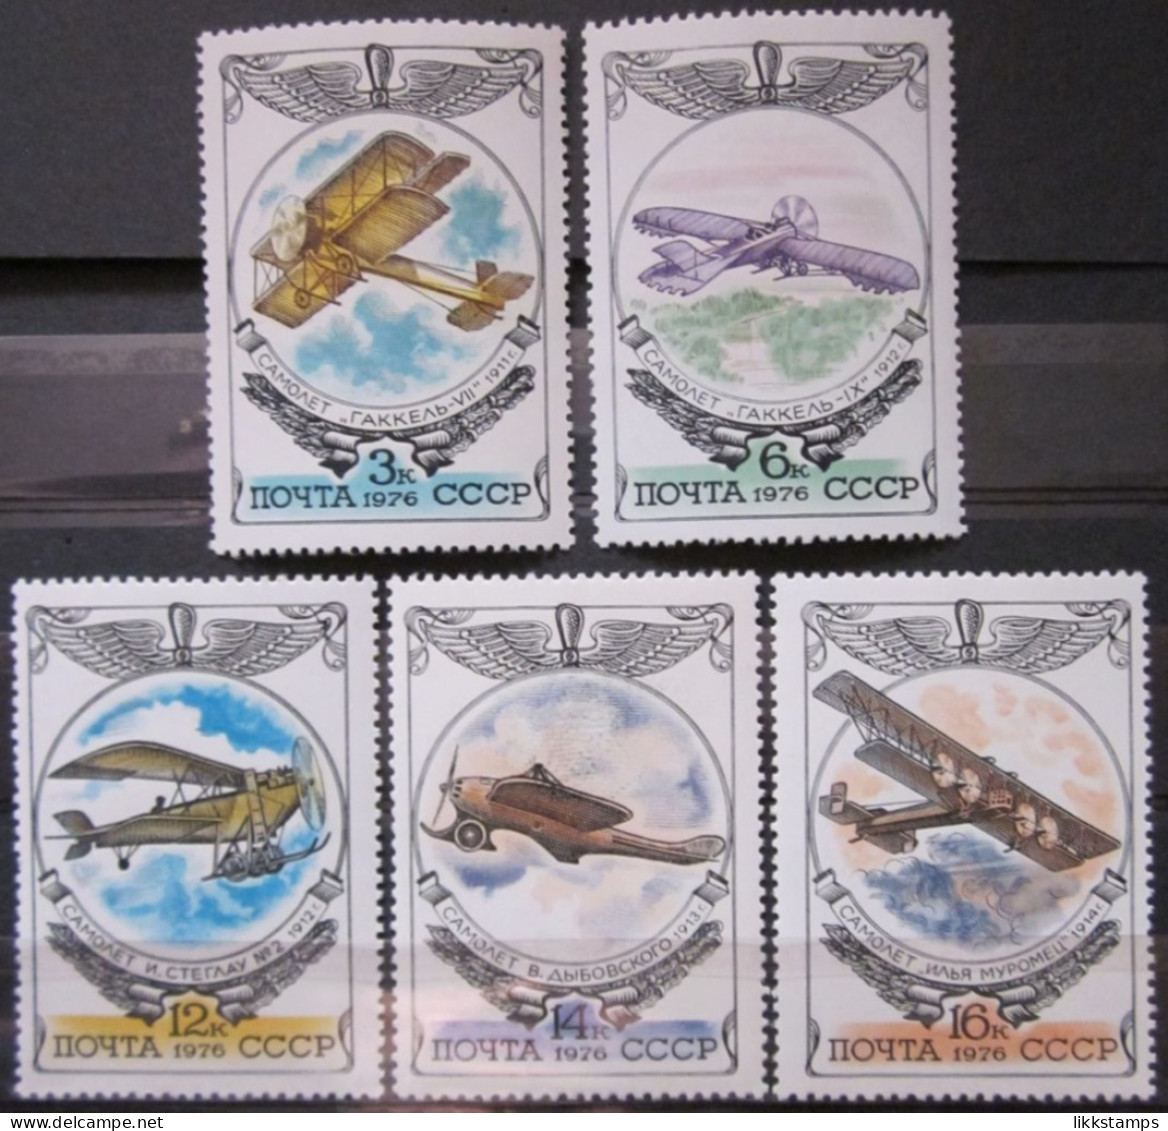 RUSSIA ~ 1976 ~ S.G. NUMBERS 4580 - 4584. ~ AIRCRAFT. ~ MNH #03583 - Ungebraucht